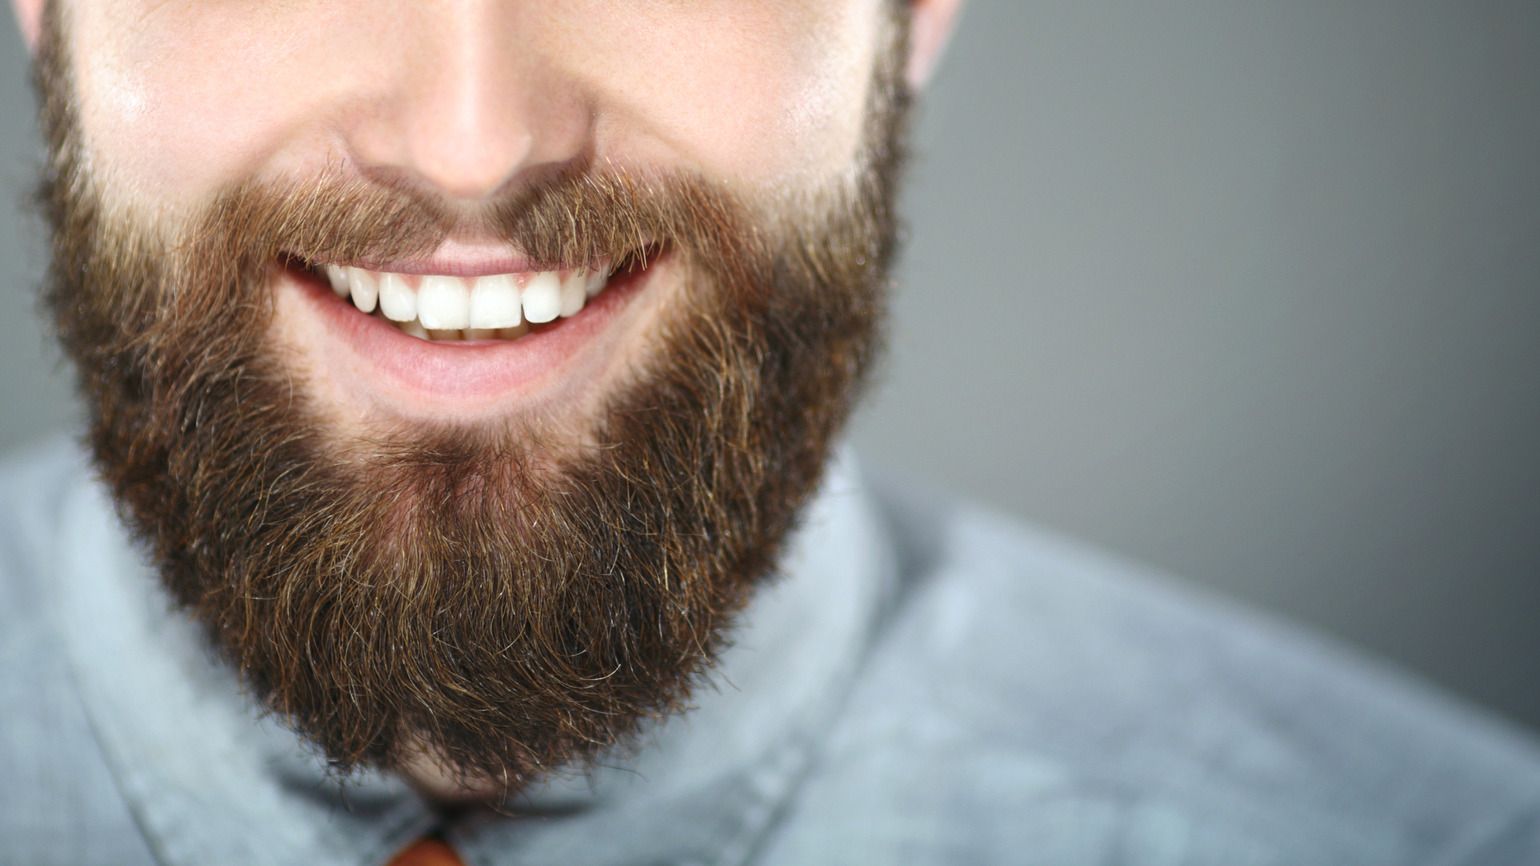 Bearded smiling man (Getty Images)